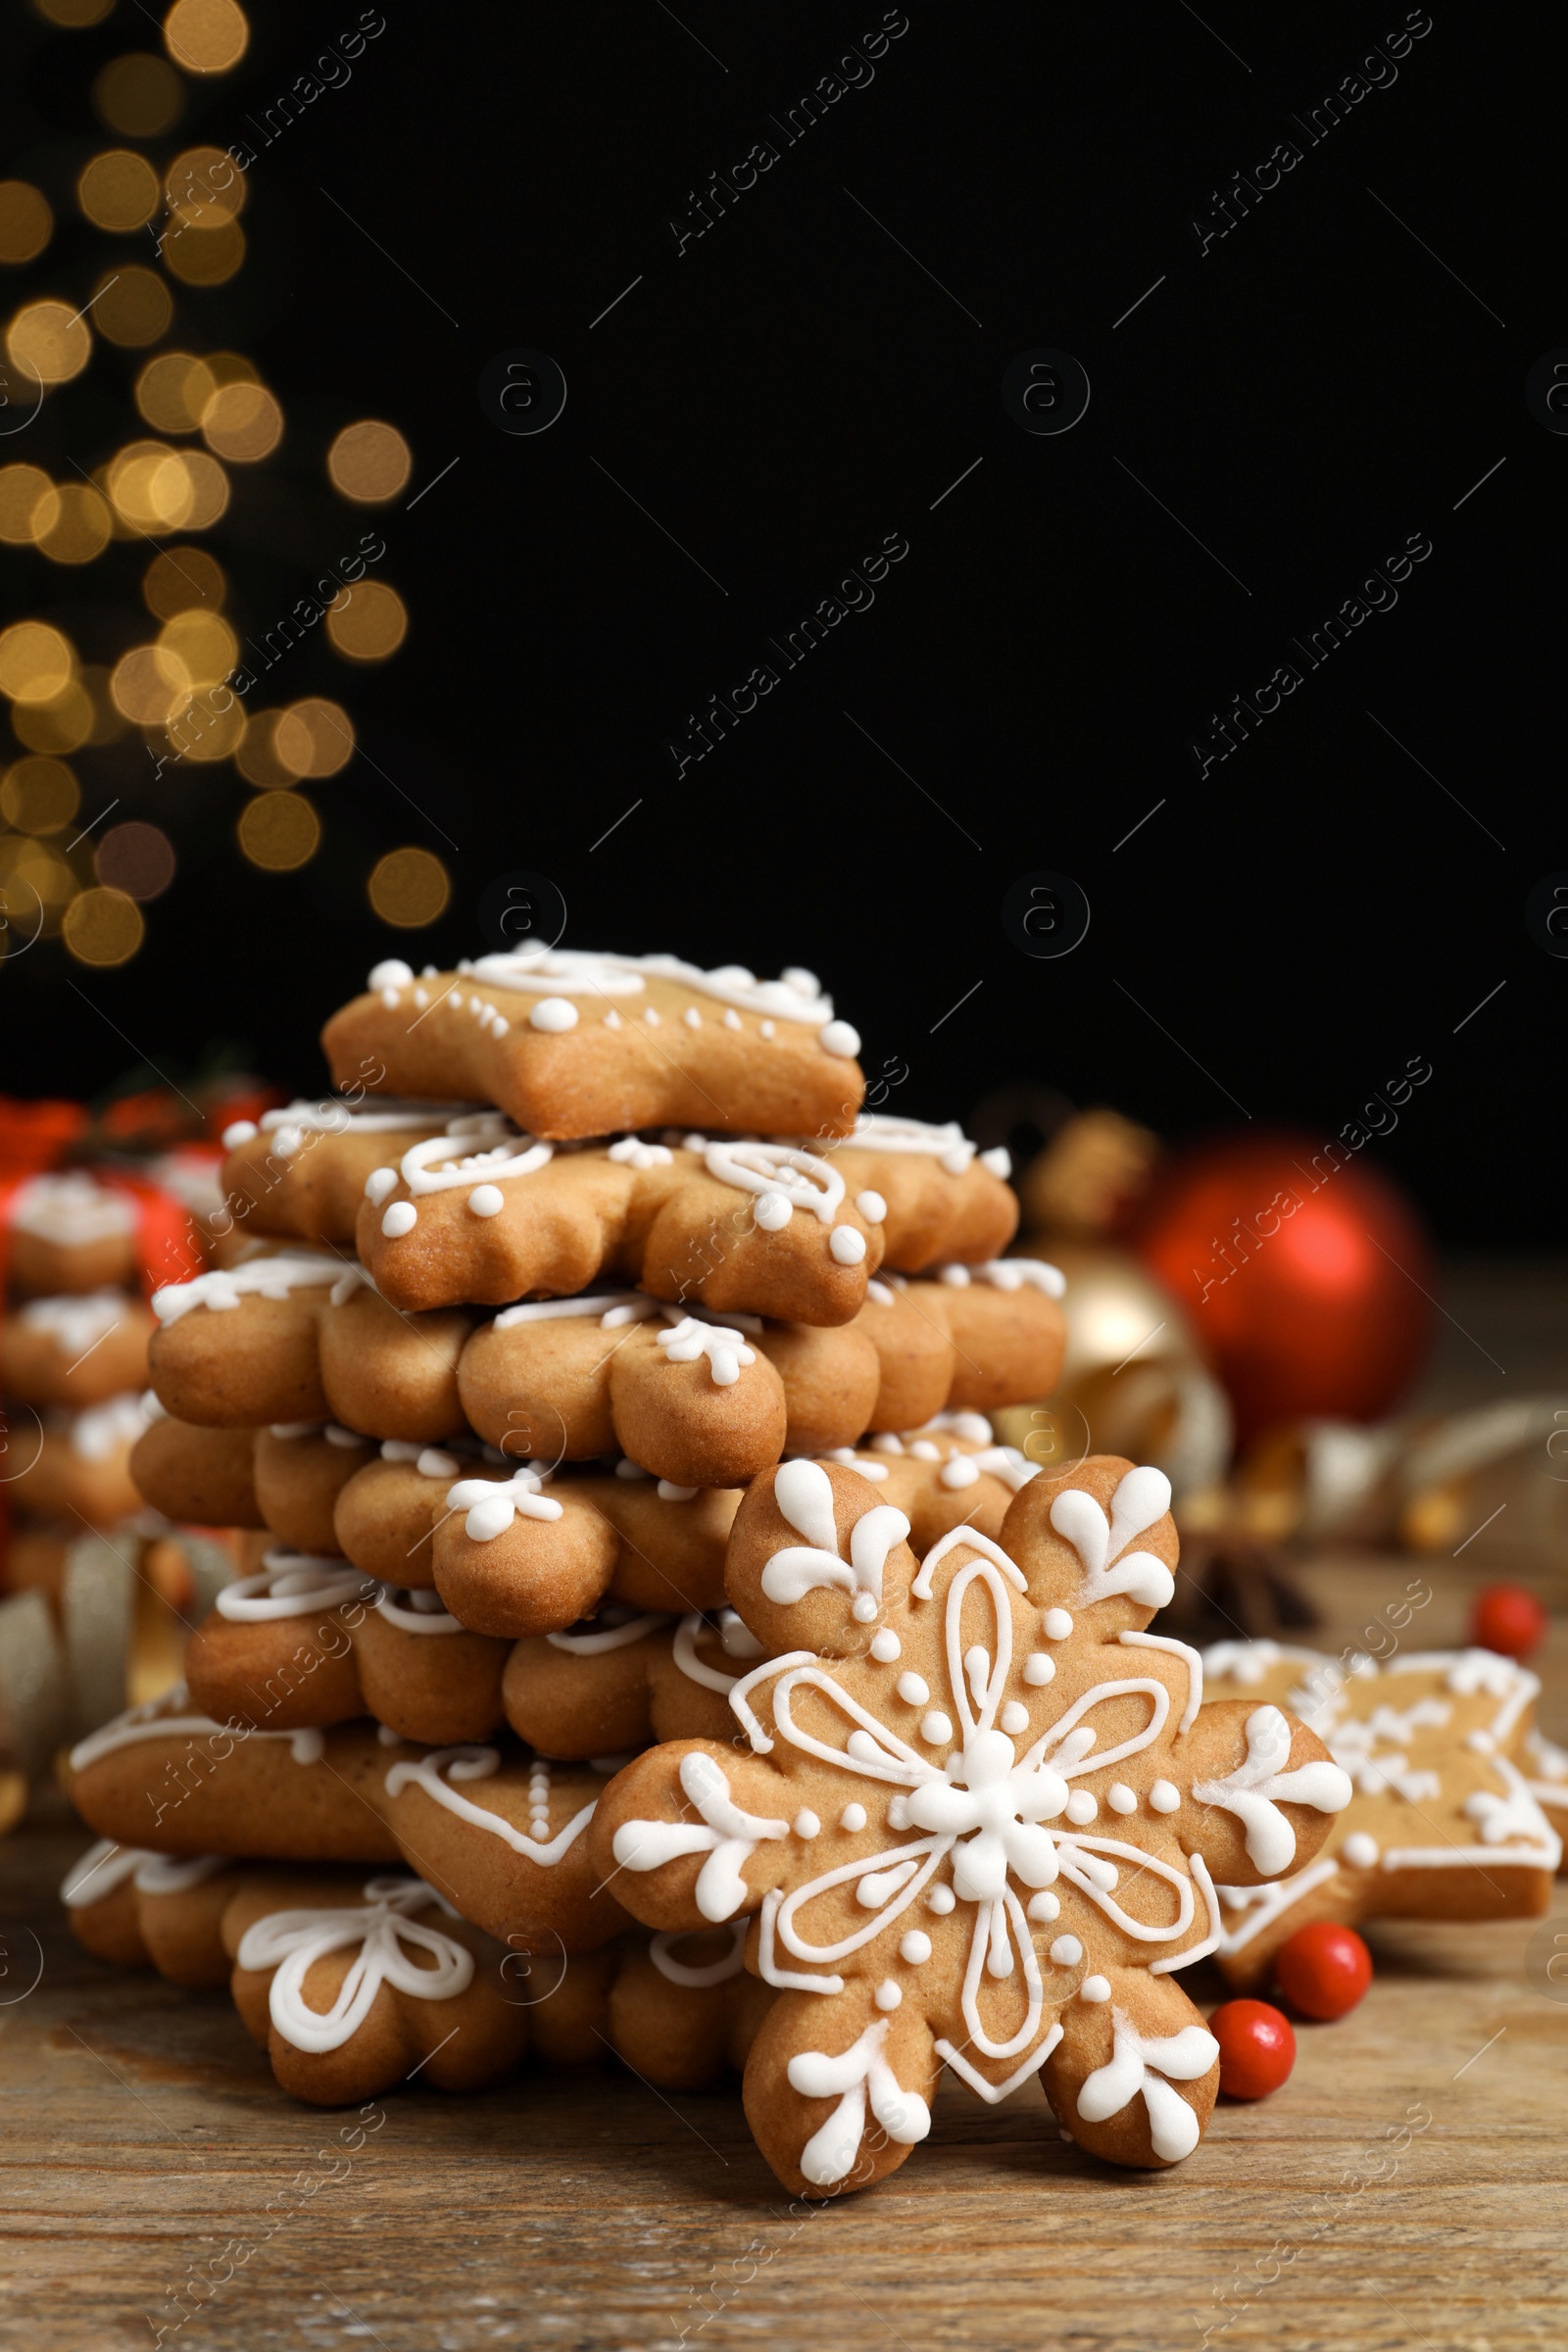 Photo of Tasty Christmas cookies on wooden table against blurred festive lights